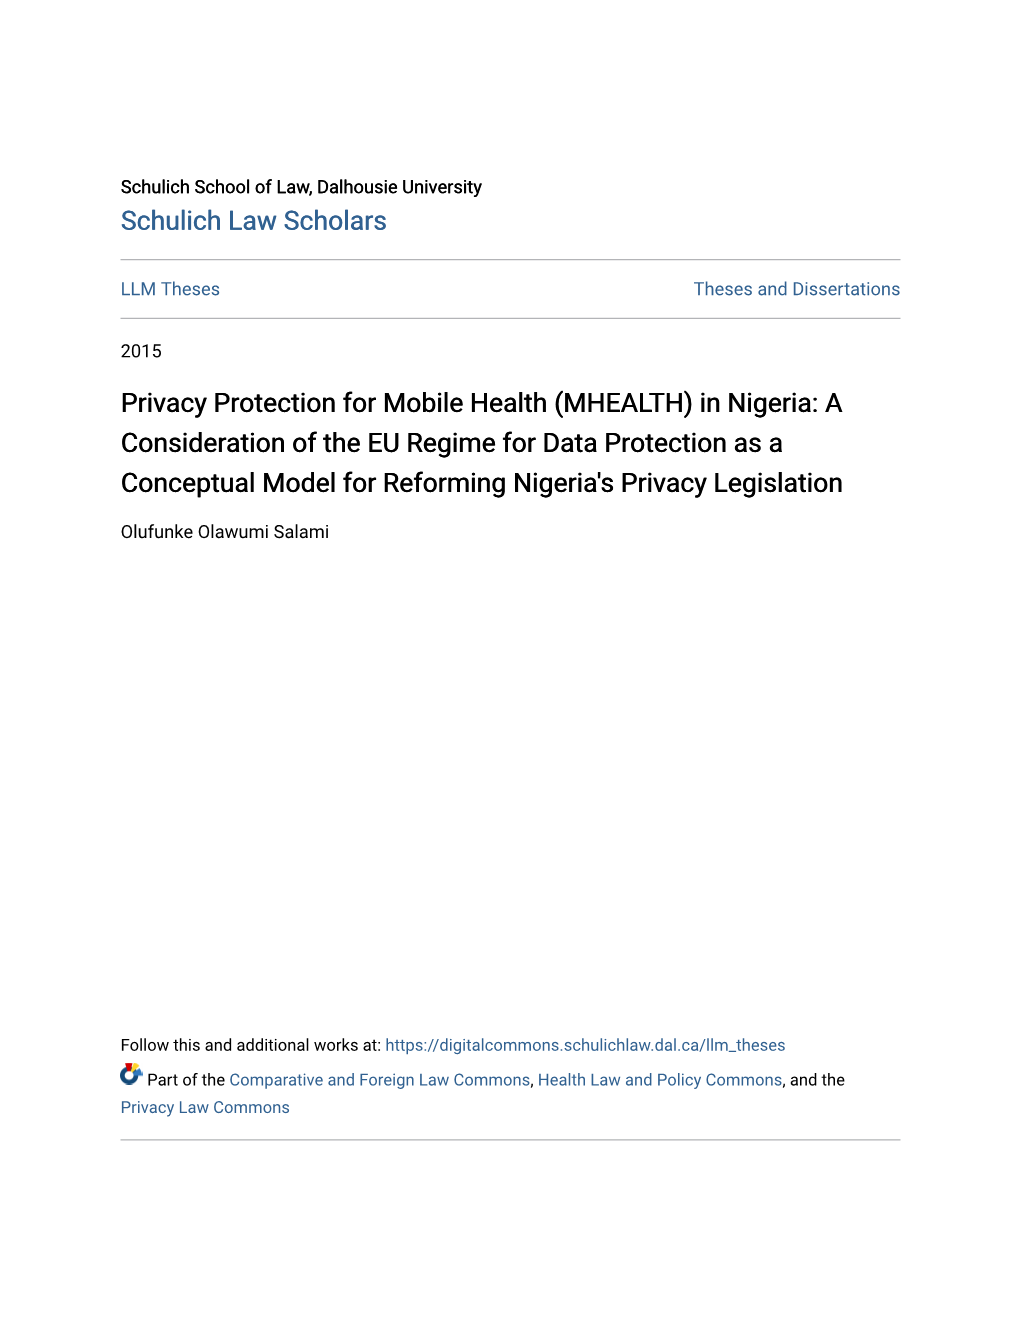 In Nigeria: a Consideration of the EU Regime for Data Protection As a Conceptual Model for Reforming Nigeria's Privacy Legislation